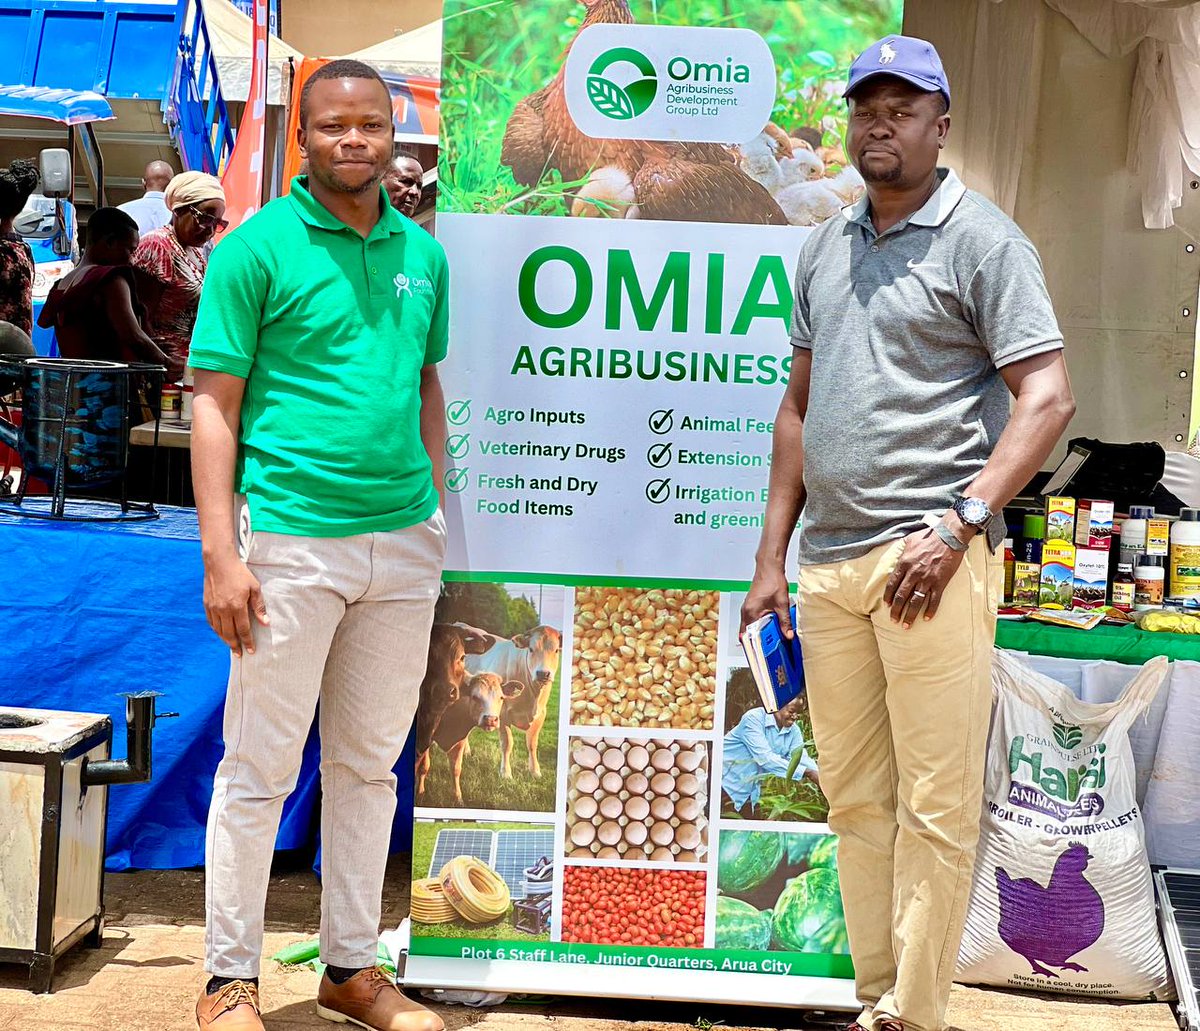 Yesterday , I ran into Mr. Atwiine John, a senior agriculture teacher from my alma mater, St. Henry's College Kitovu, at the #HarvestMoneyExpo. It seems like he's cooking up something exciting for the college. Agriculture students, brace yourselves!